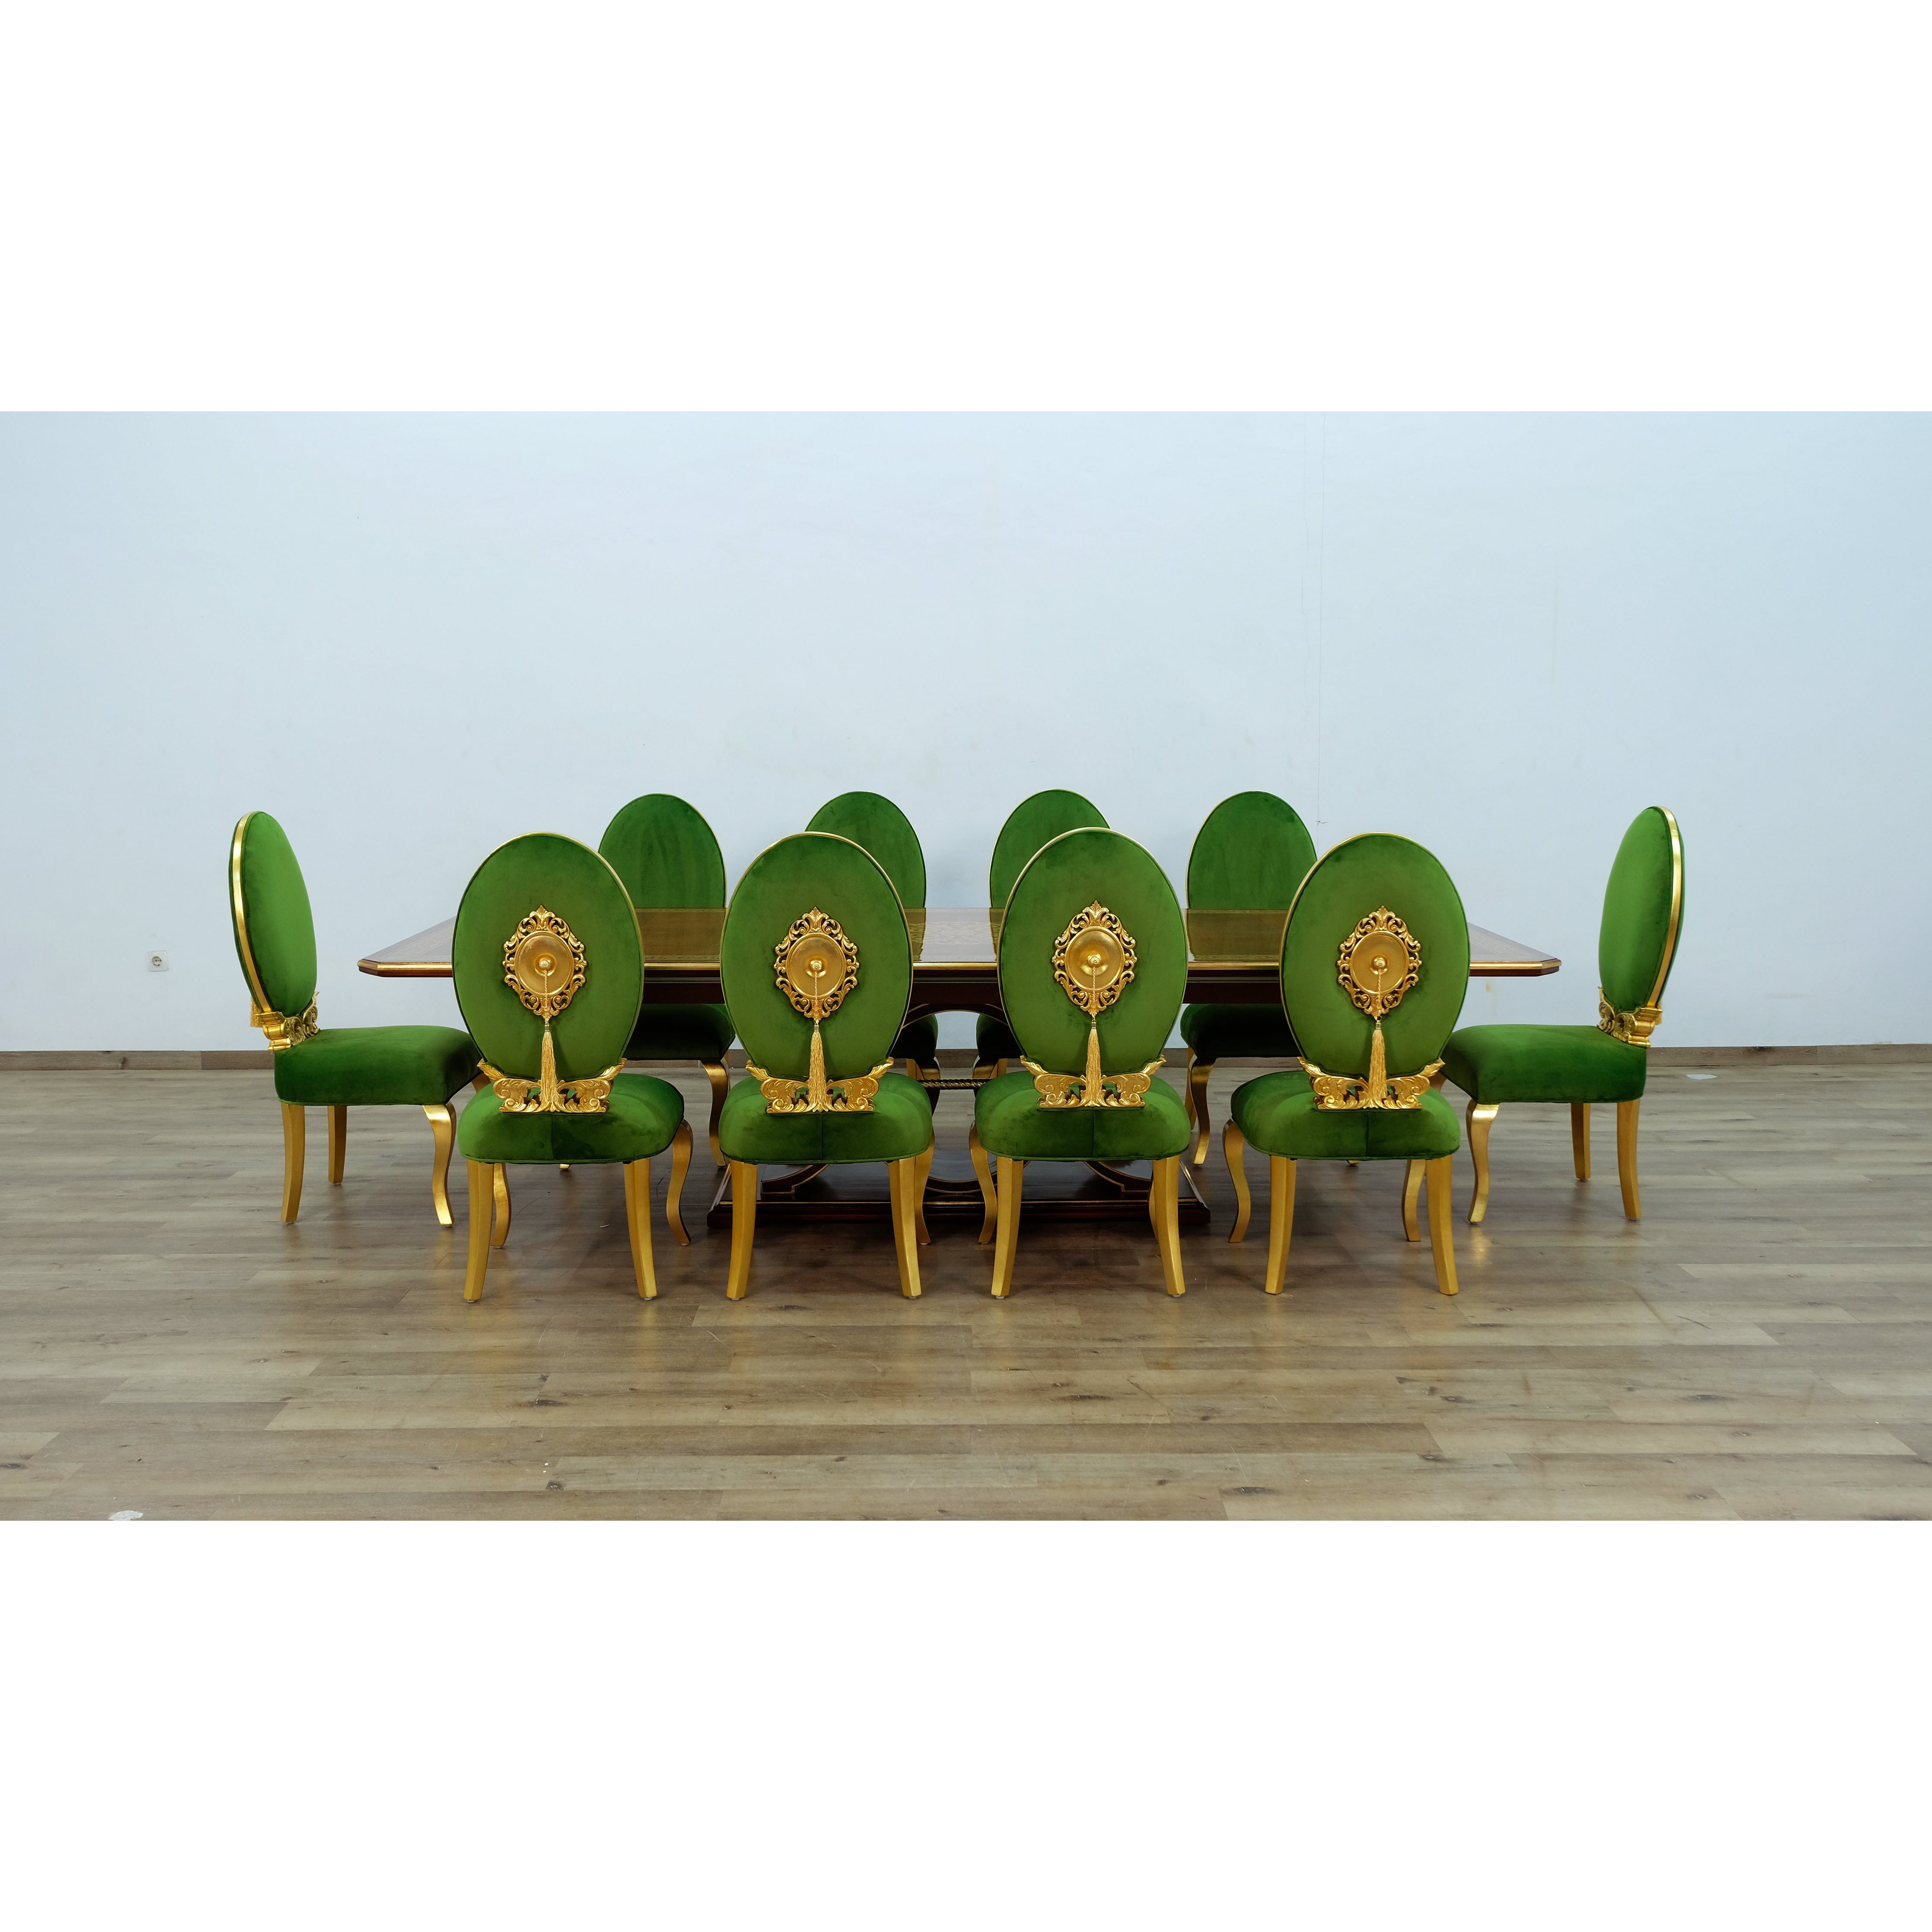 European Furniture - Rosella 11 Piece Dining Room Set With Emerald Green Chair - 44697-11SET-G - New Star Living